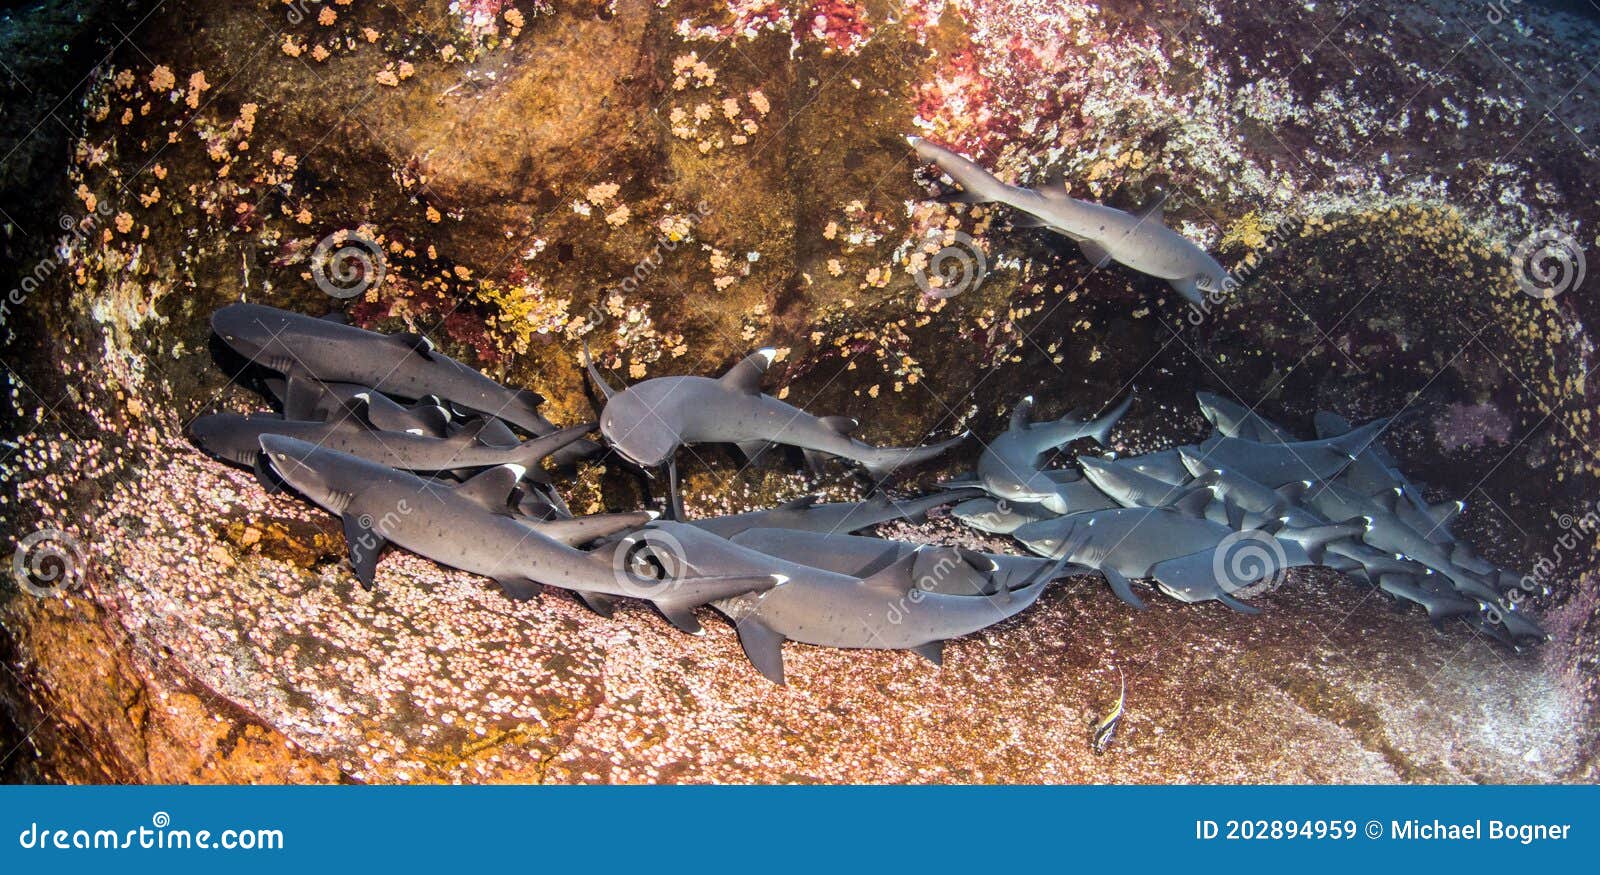 white tip reef sharks at roca partida, mexico